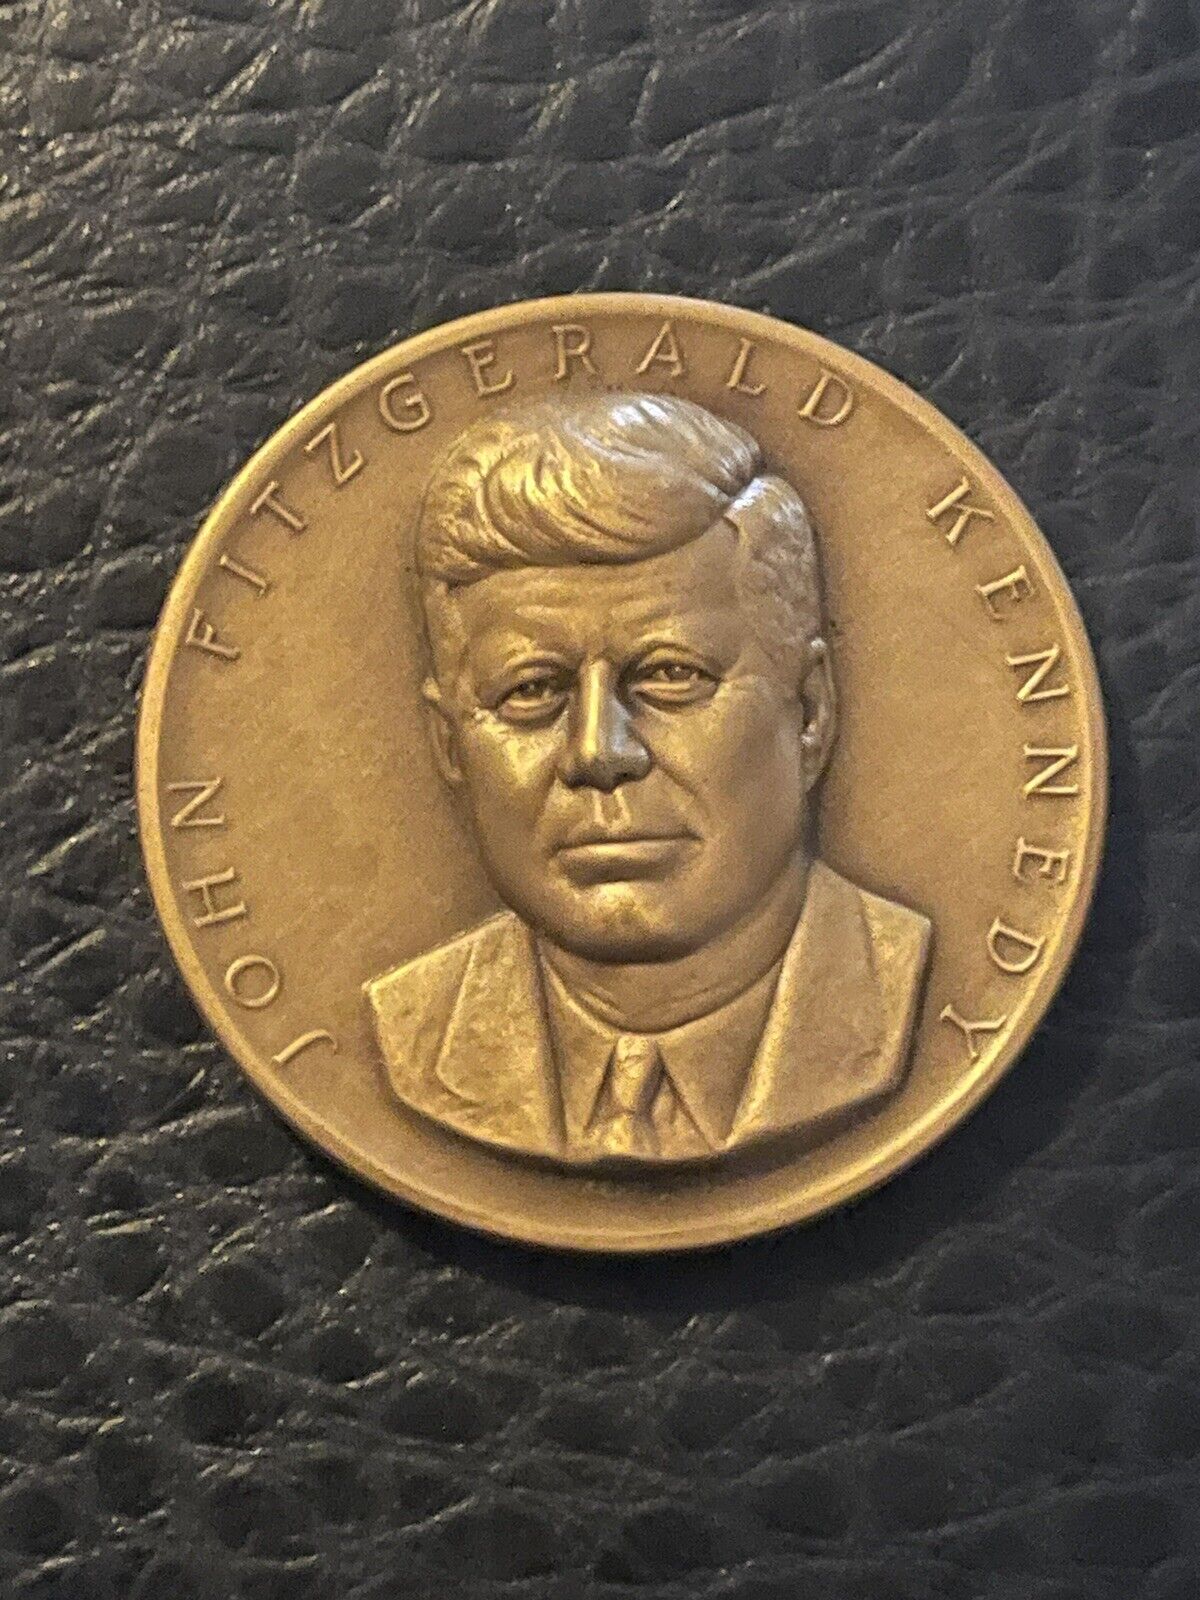 JFK JOHN F.  KENNEDY   HIGH RELIEF BRONZE MEDAL 31MM ++++Free Coins Included